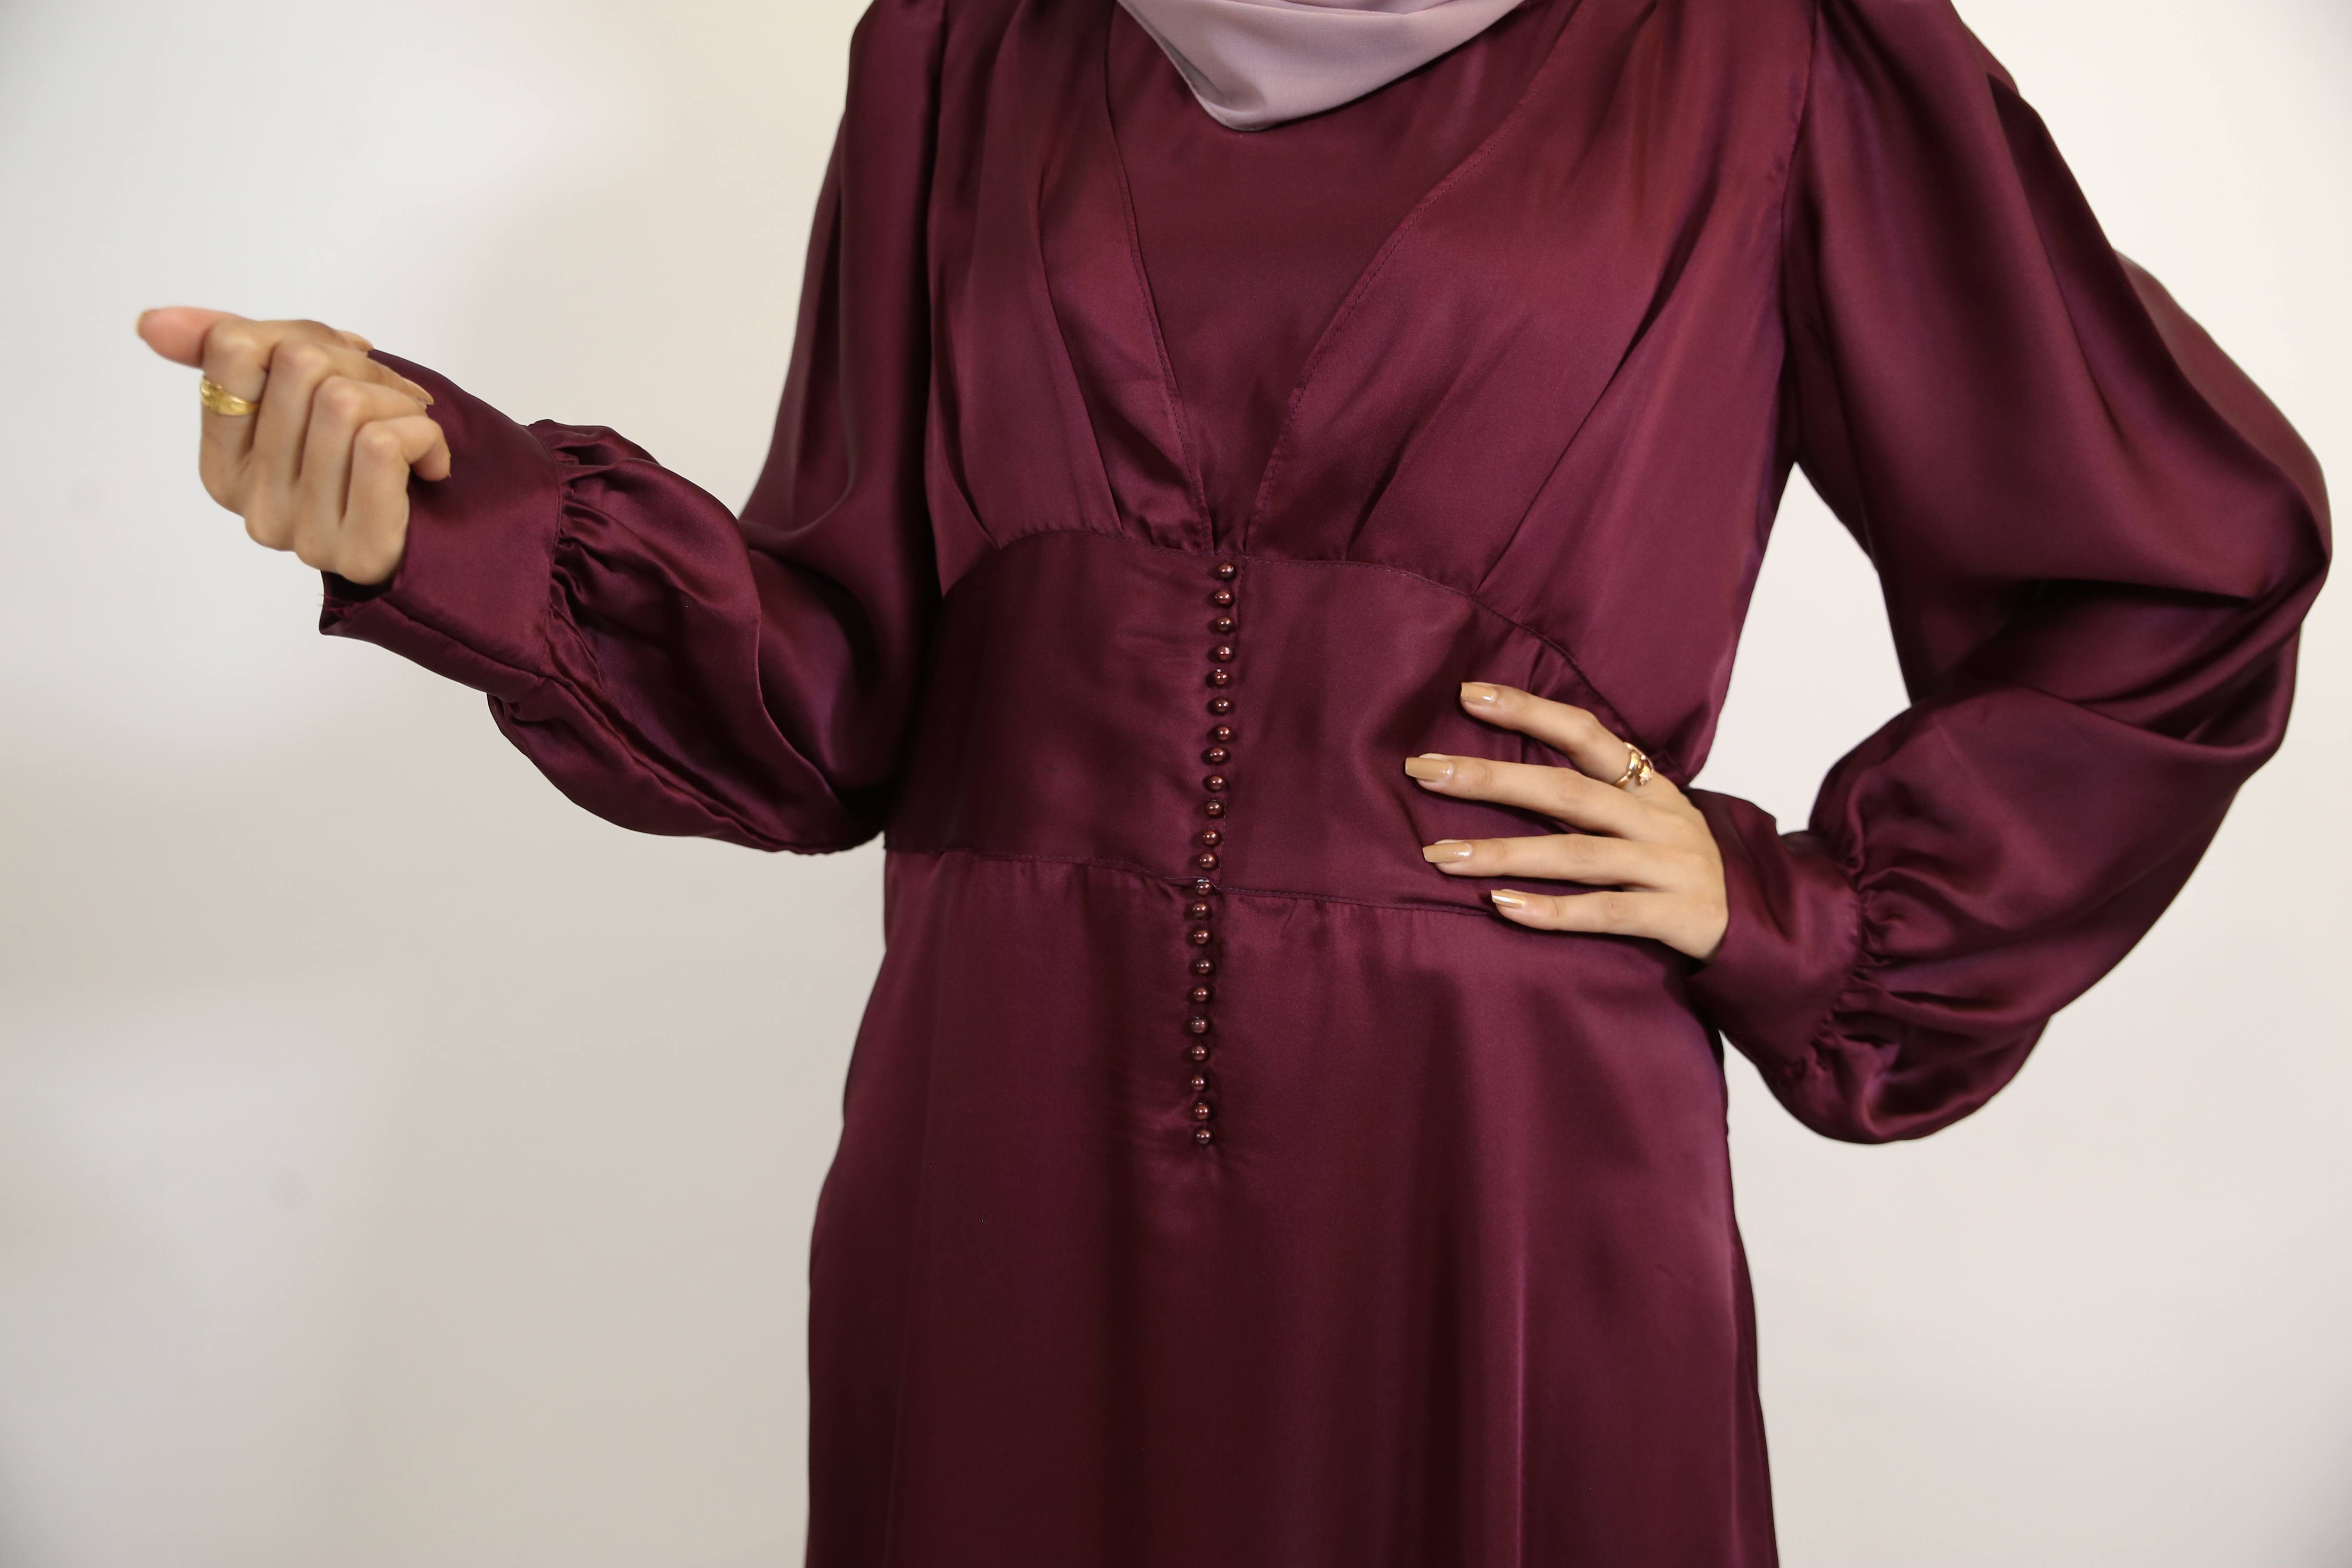 Qirmizi- Classy Satin Maxi Dress with button array front detailing- Mulberry Red